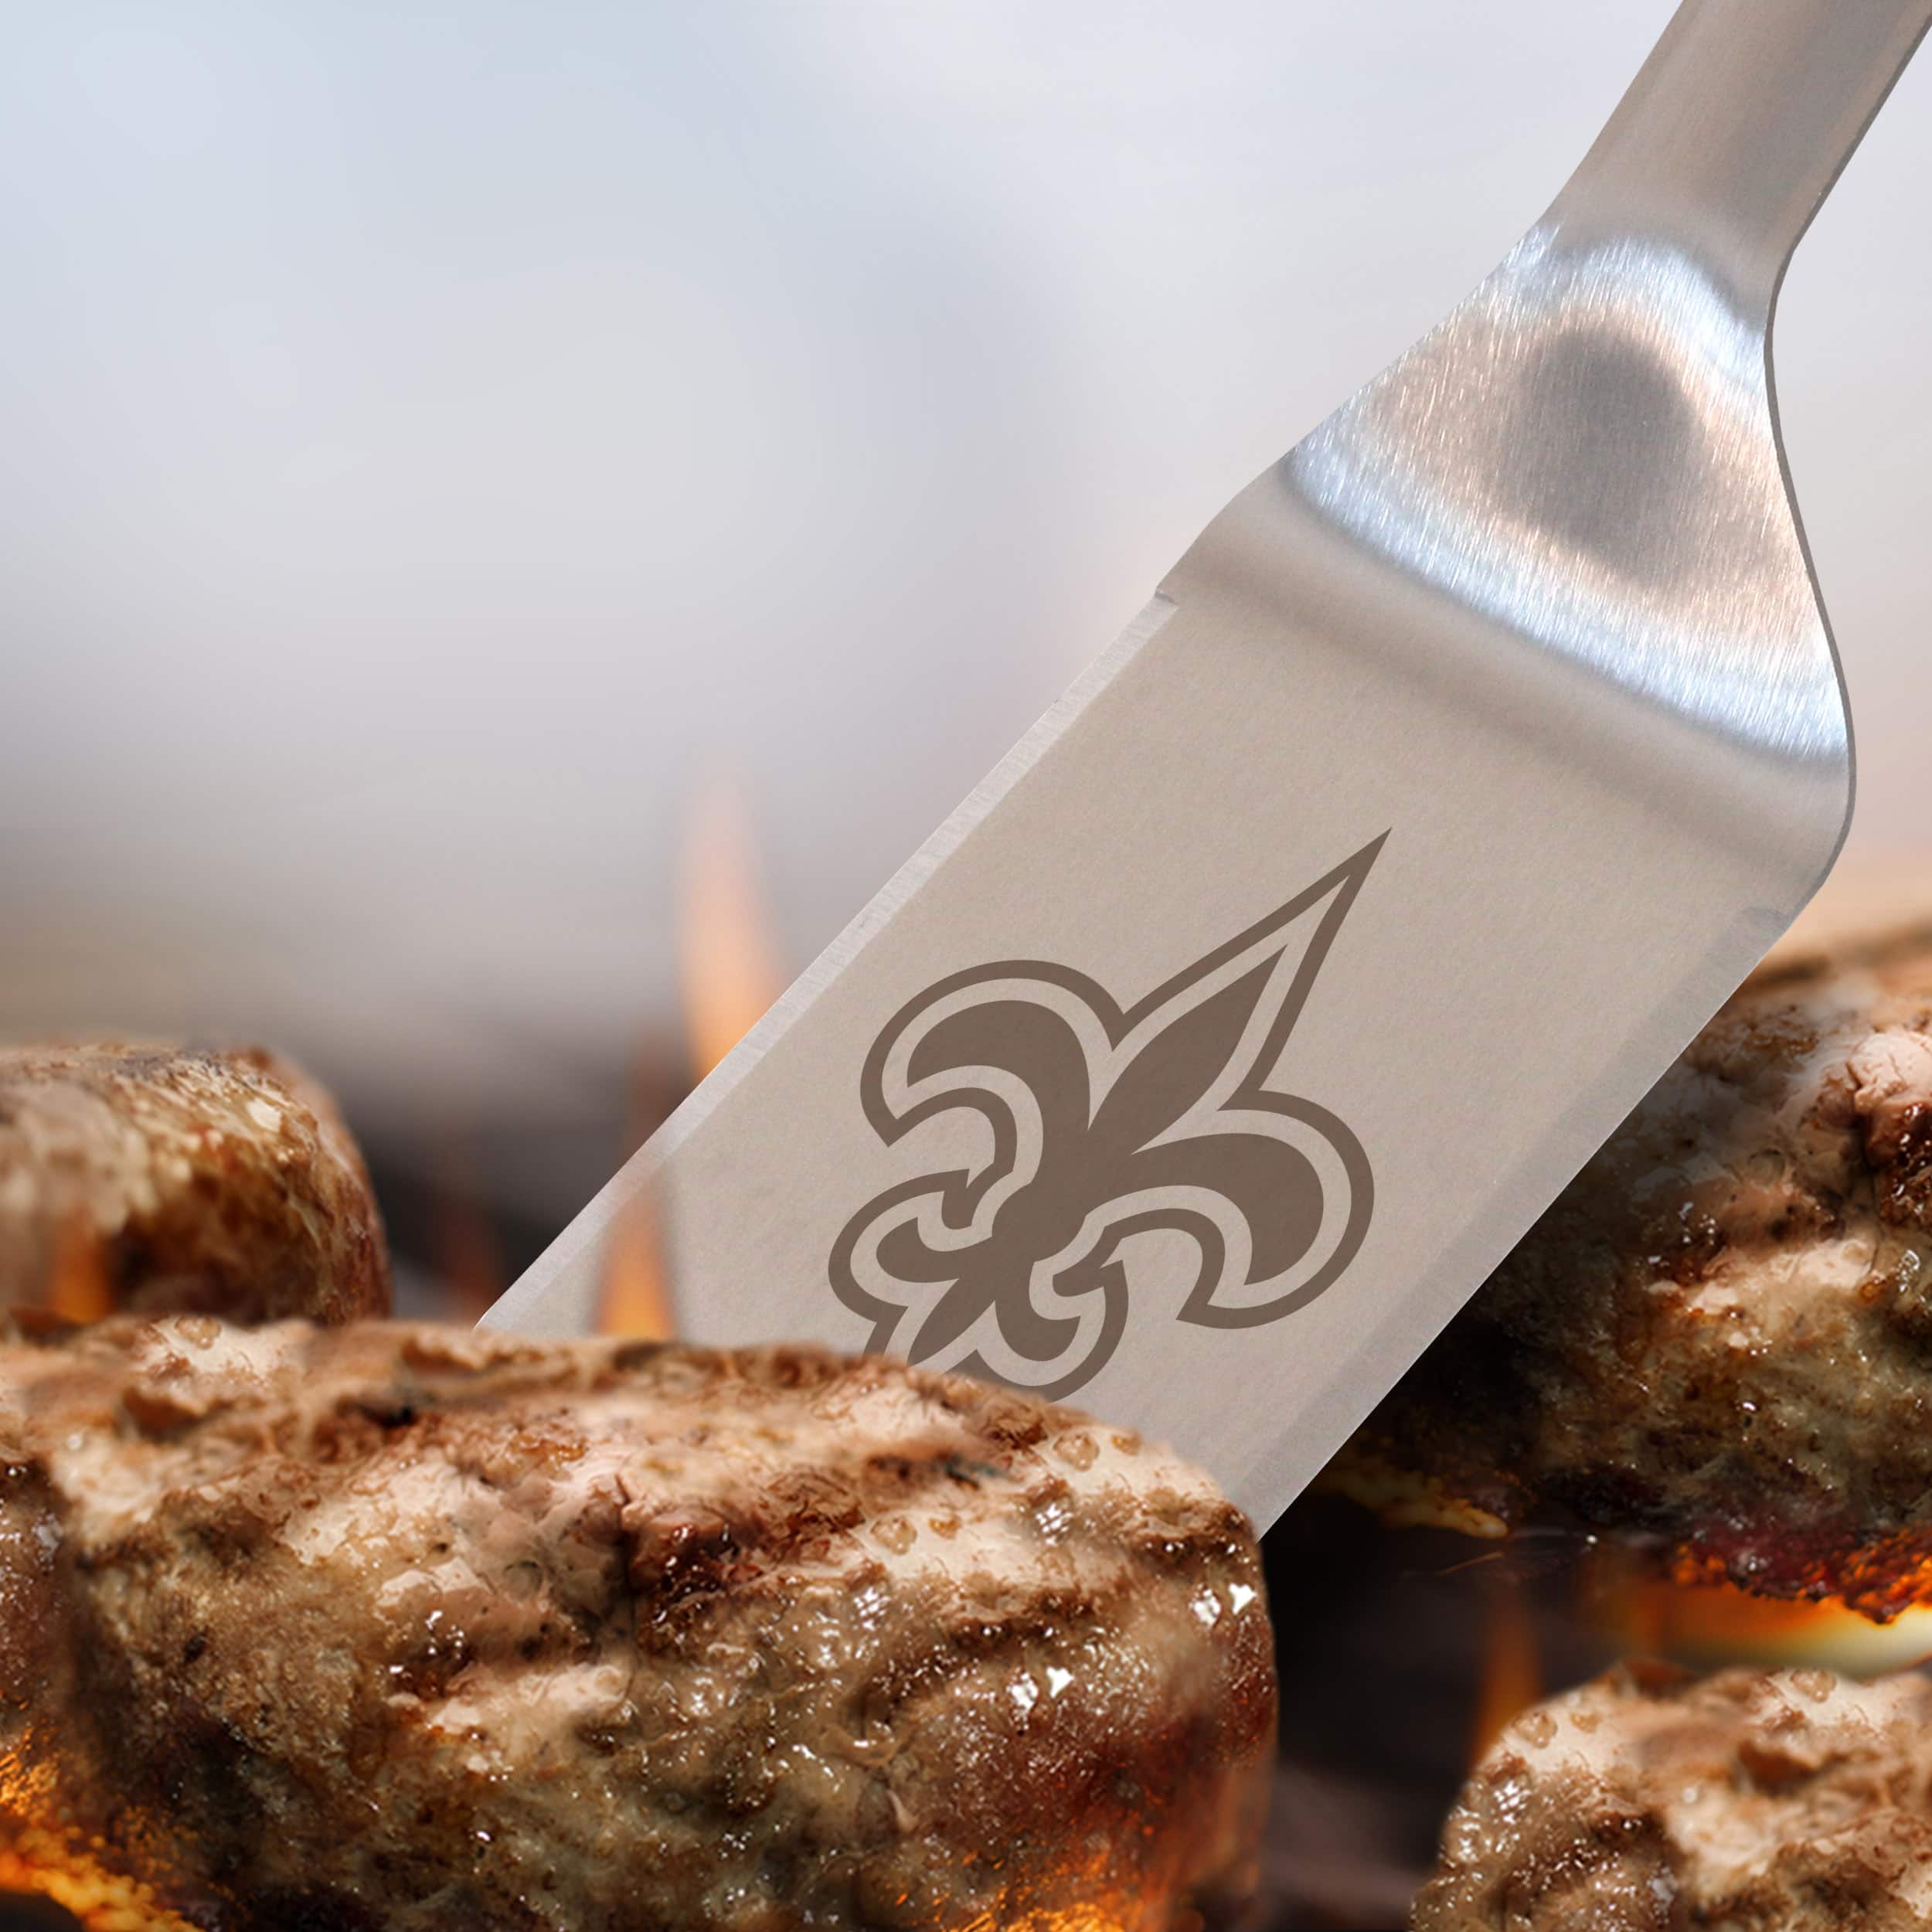 NFL Stainless Steel BBQ Spatula with Bottle Opener